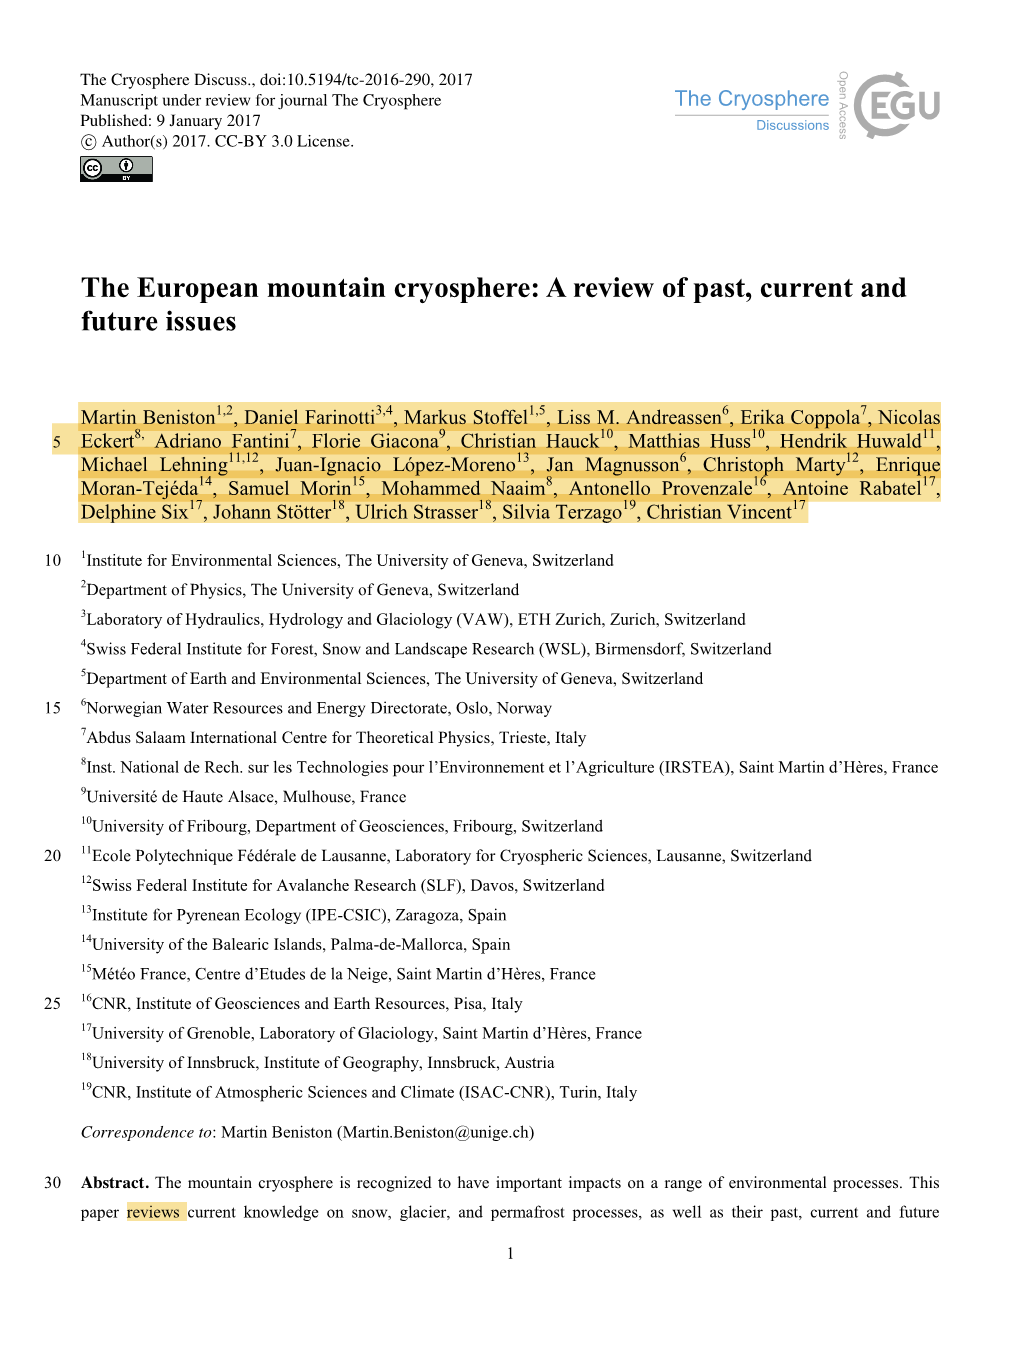 The European Mountain Cryosphere: a Review of Past, Current and Future Issues